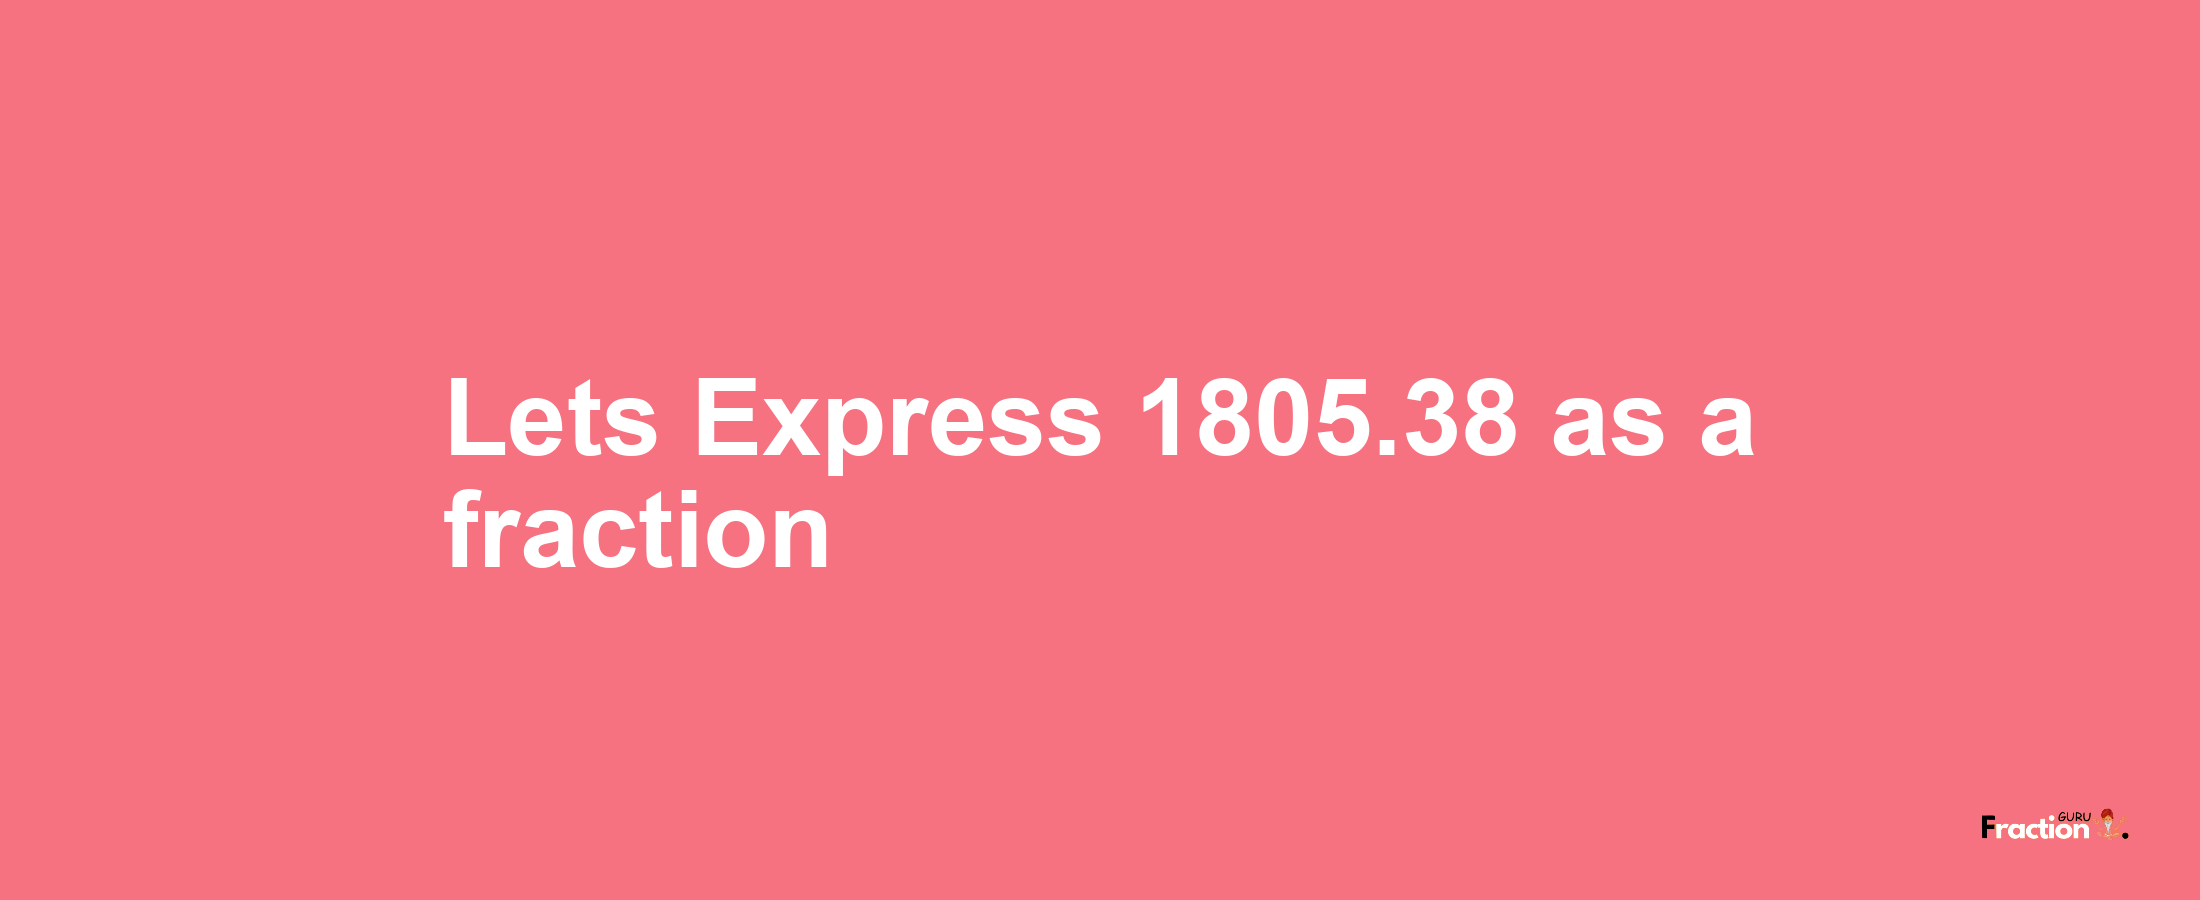 Lets Express 1805.38 as afraction